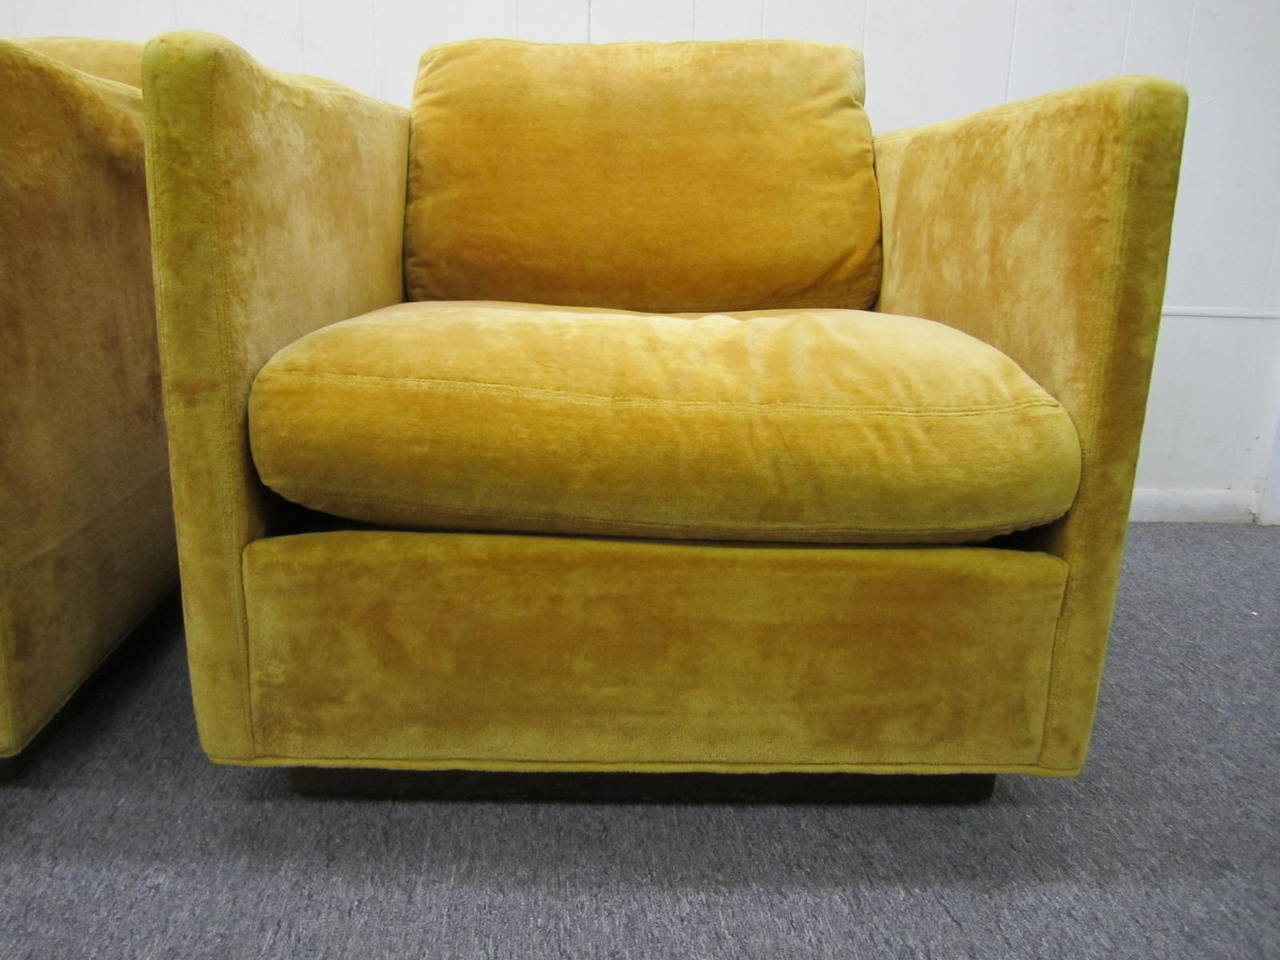 Upholstery Fantastic Pair of Signed Milo Baughman Cube Lounge Chairs for James Inc.